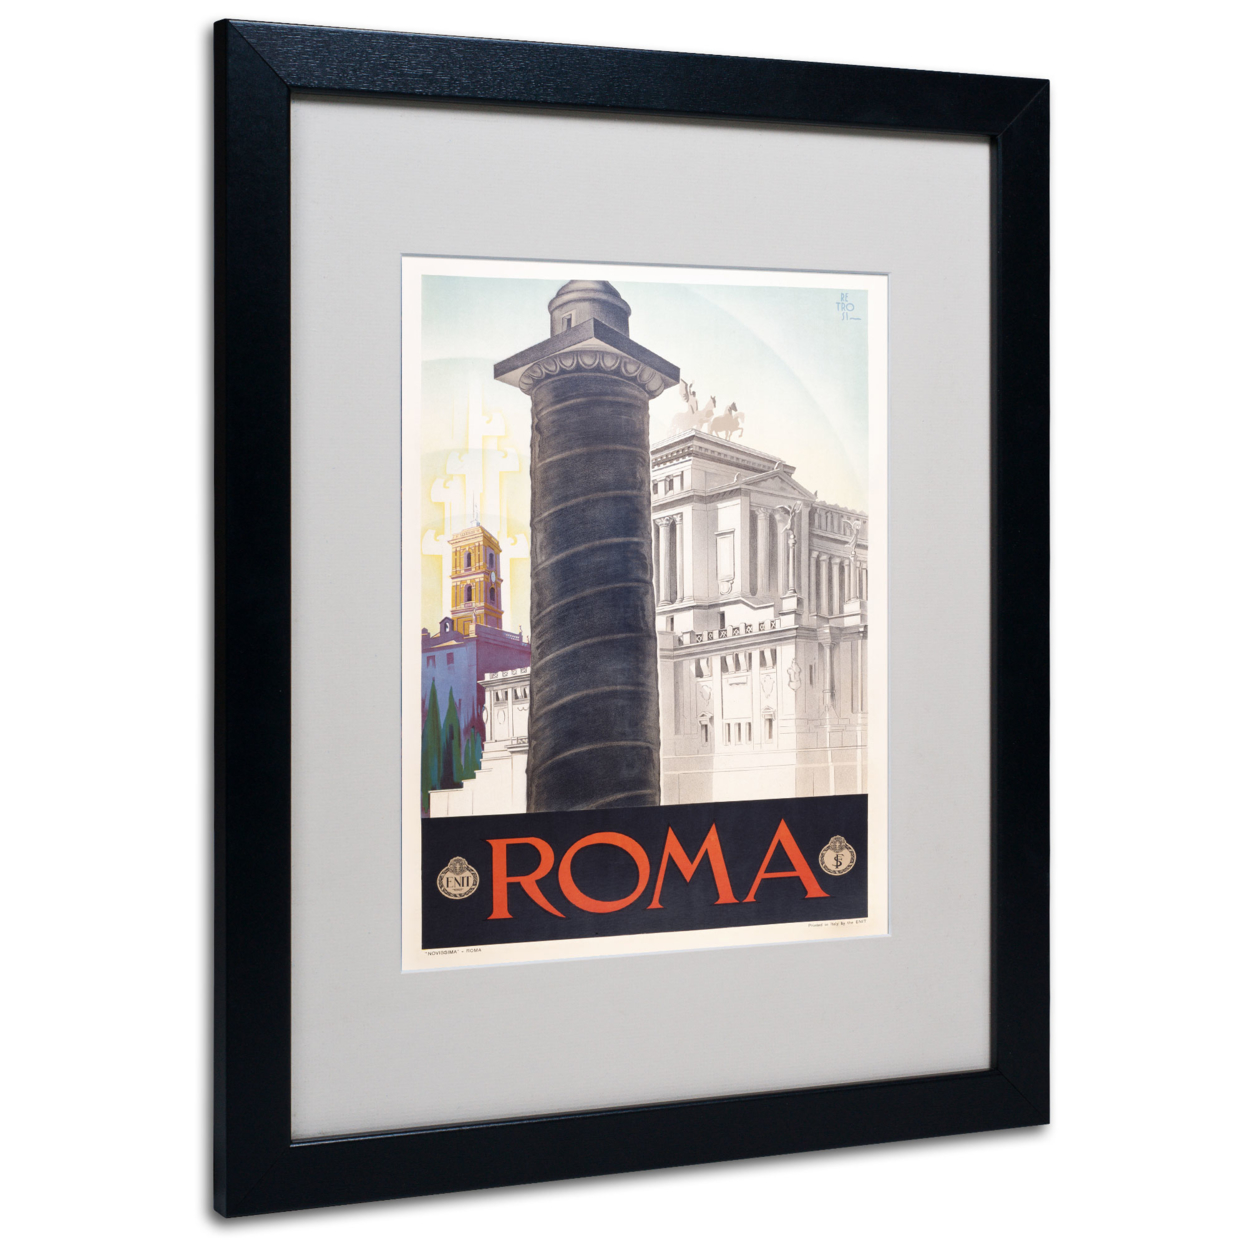 Roma' Black Wooden Framed Art 18 X 22 Inches